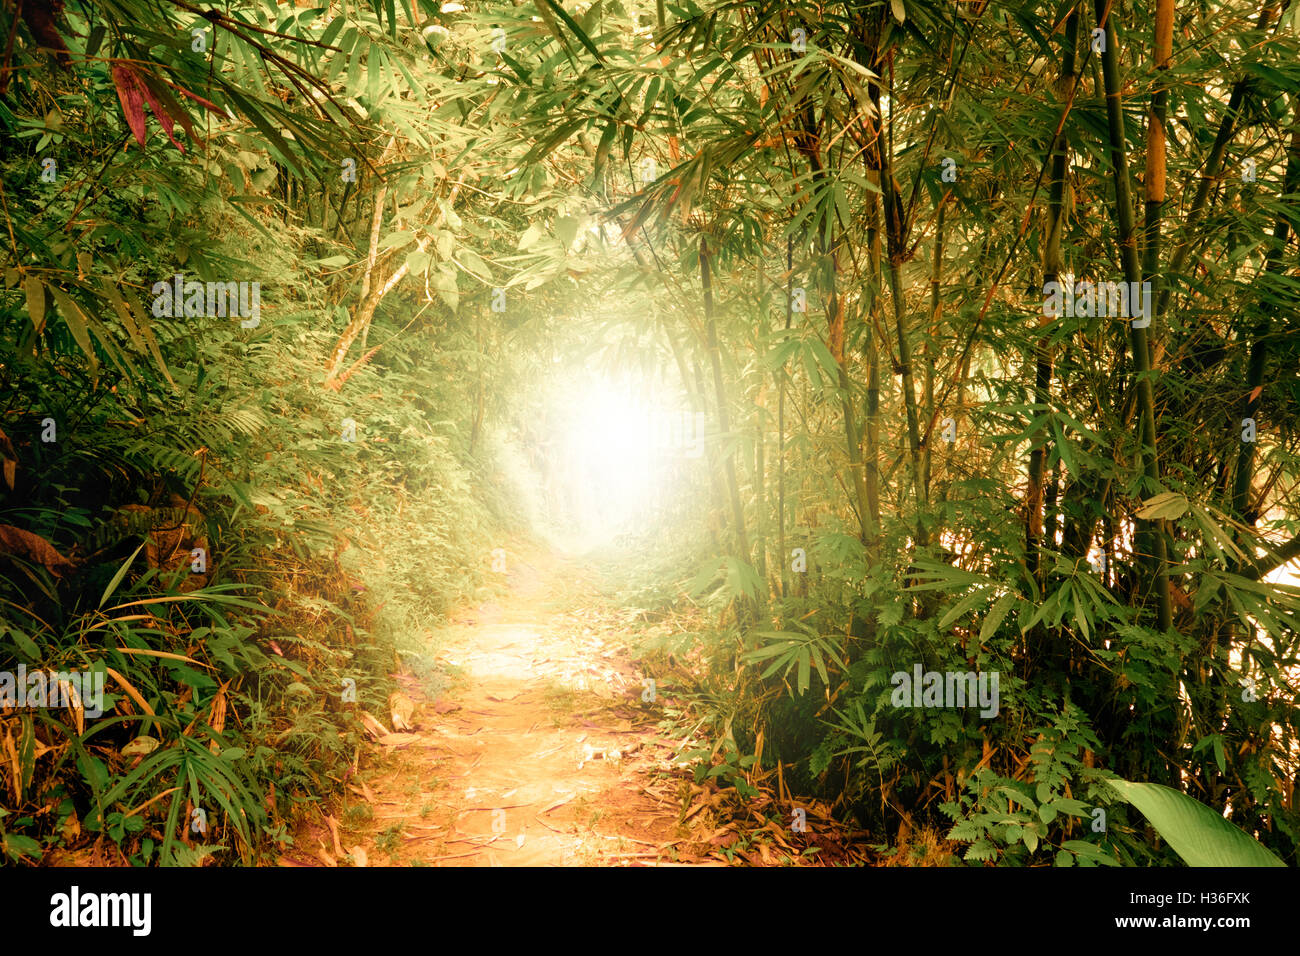 Surreal colors of fantasy landscape at tropical jungle forest with sun rays shining through tunnel in dense vegetation Stock Photo